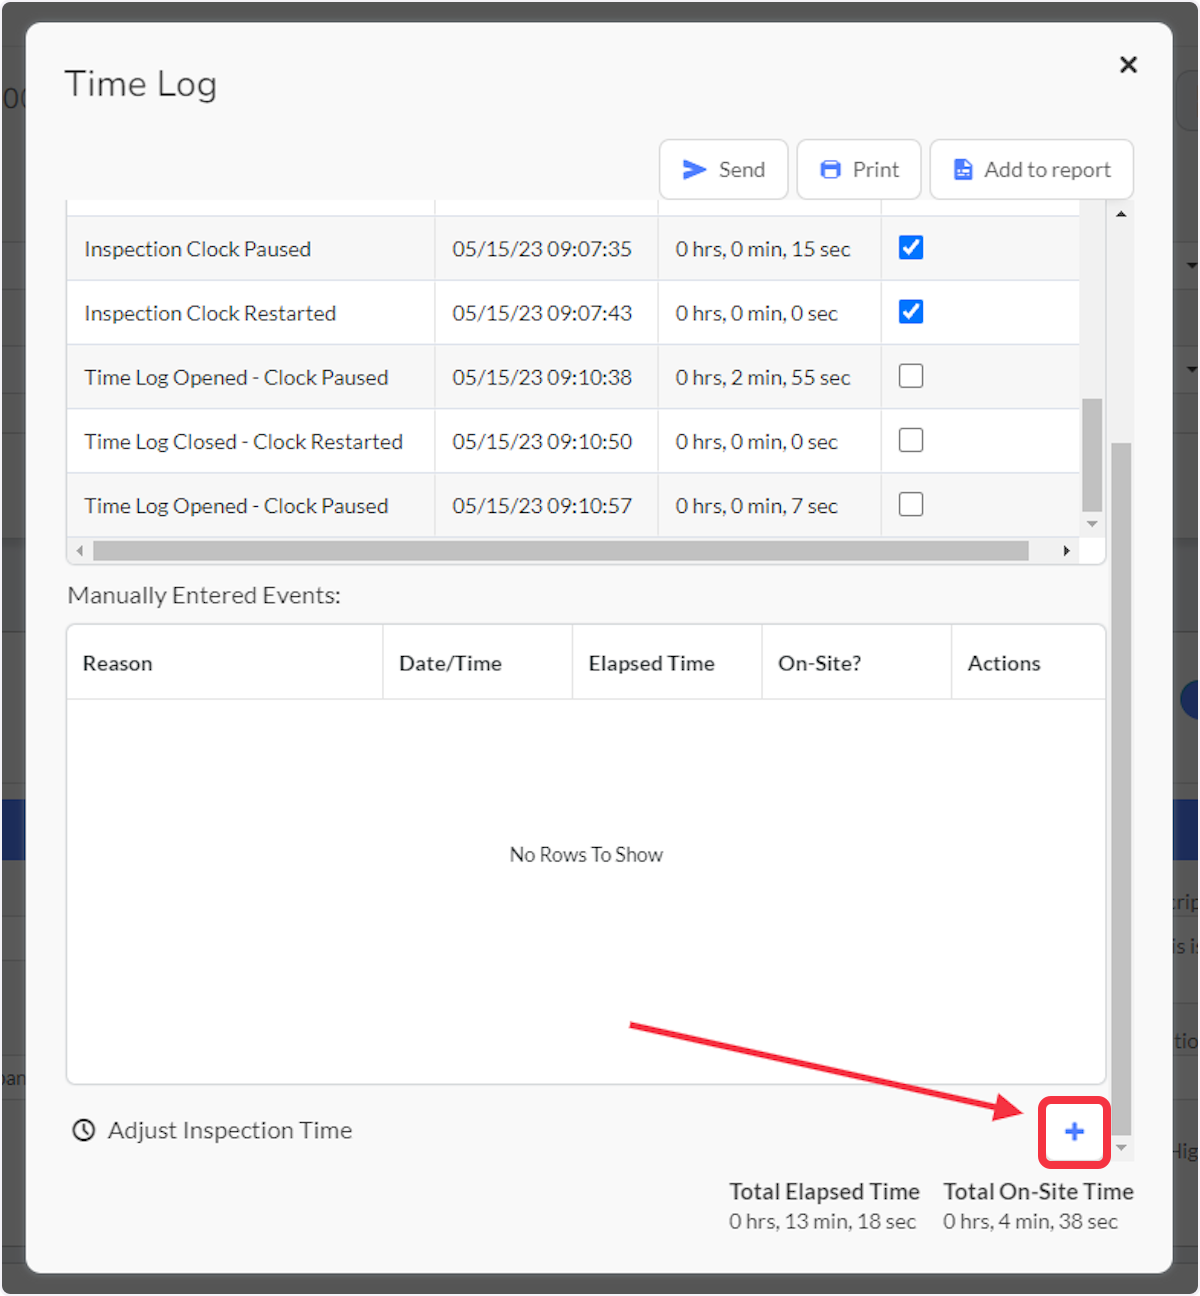 Click on Adjust Inspection Time to add or subtract Inspection time.